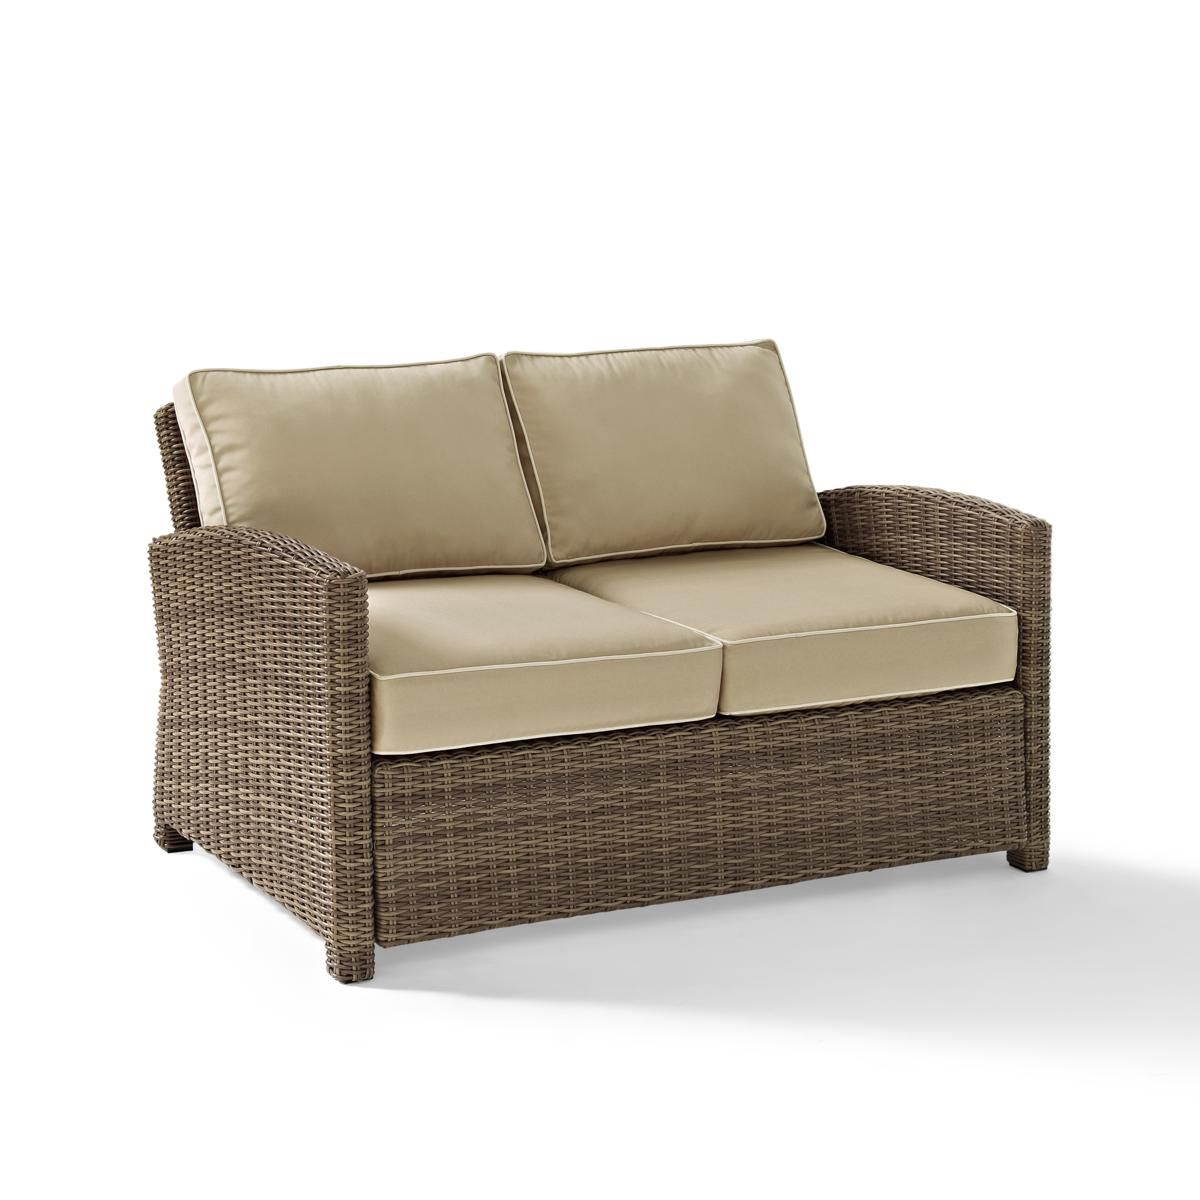 Crosley Bradenton Outdoor Wicker Loveseat With Sand Cushions | Hsn Throughout Outdoor Sand Cushions Loveseats (Photo 12 of 15)